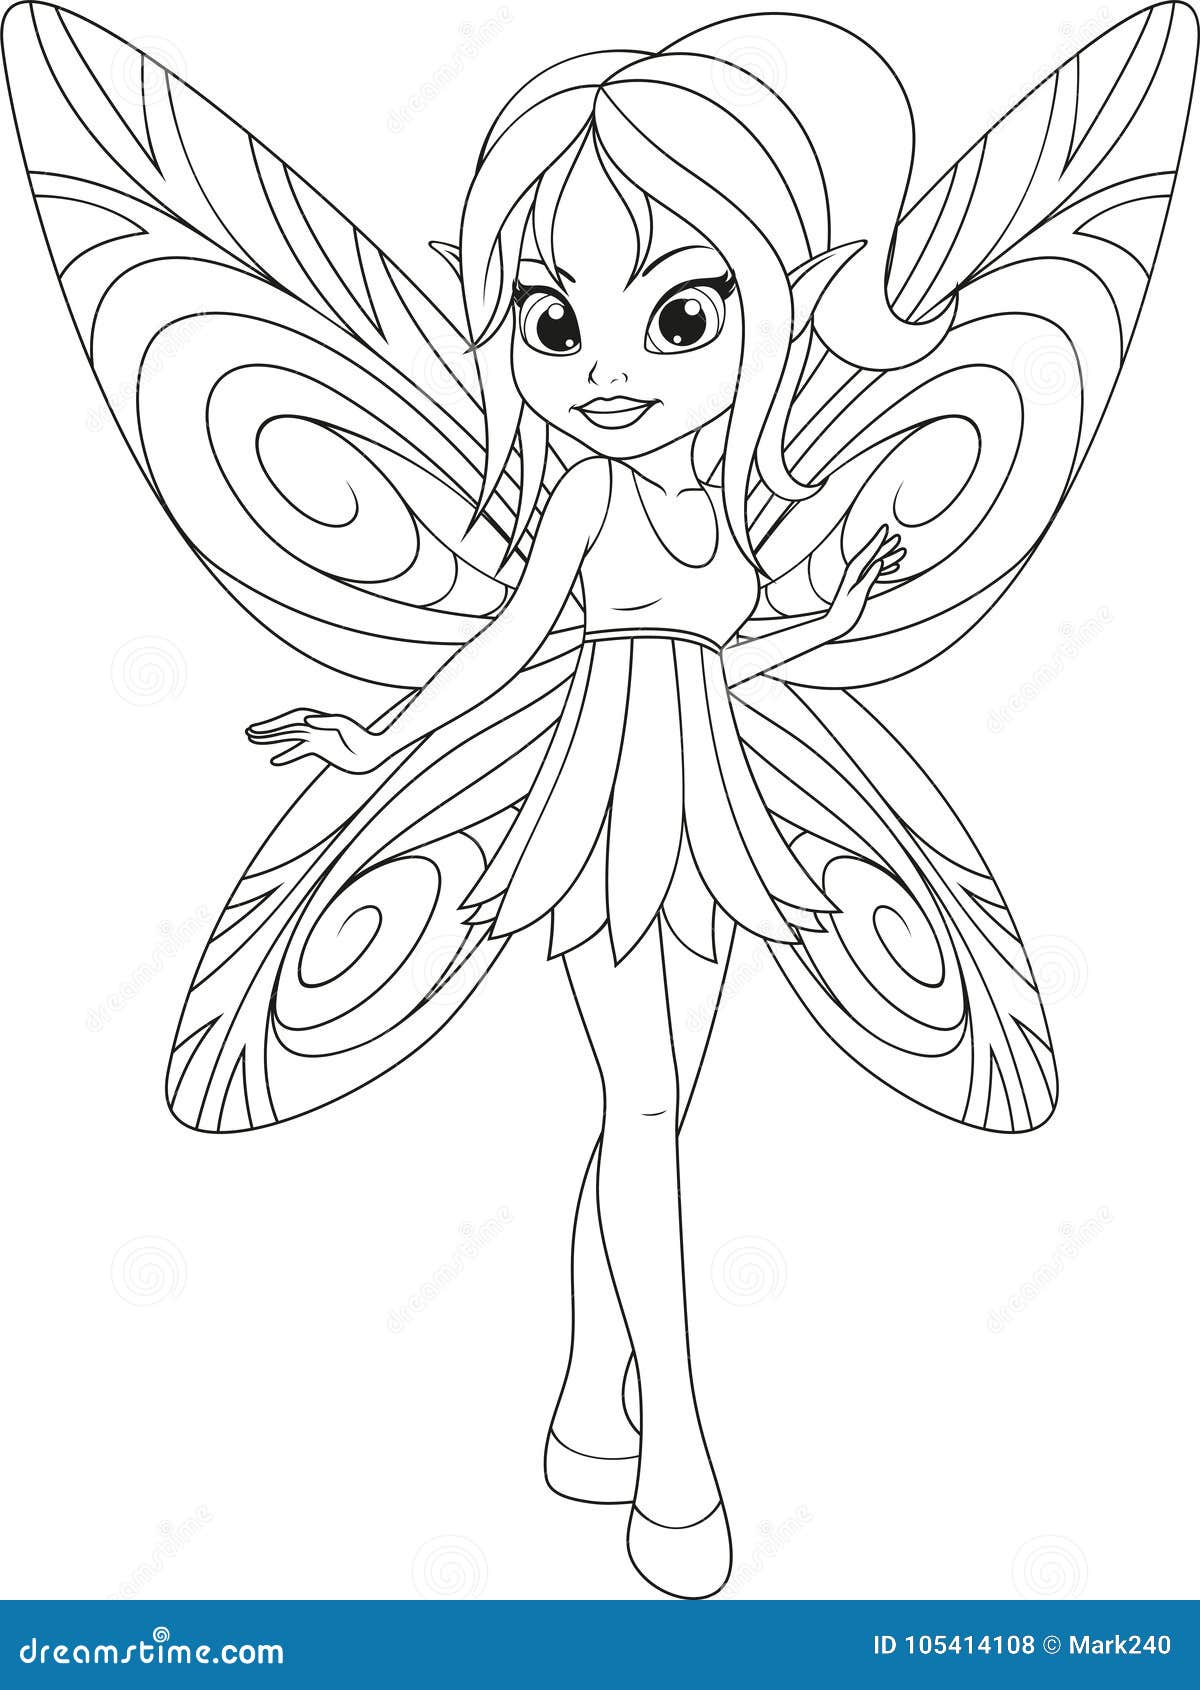 Cute fairy with wingsn stock vector illustration of child